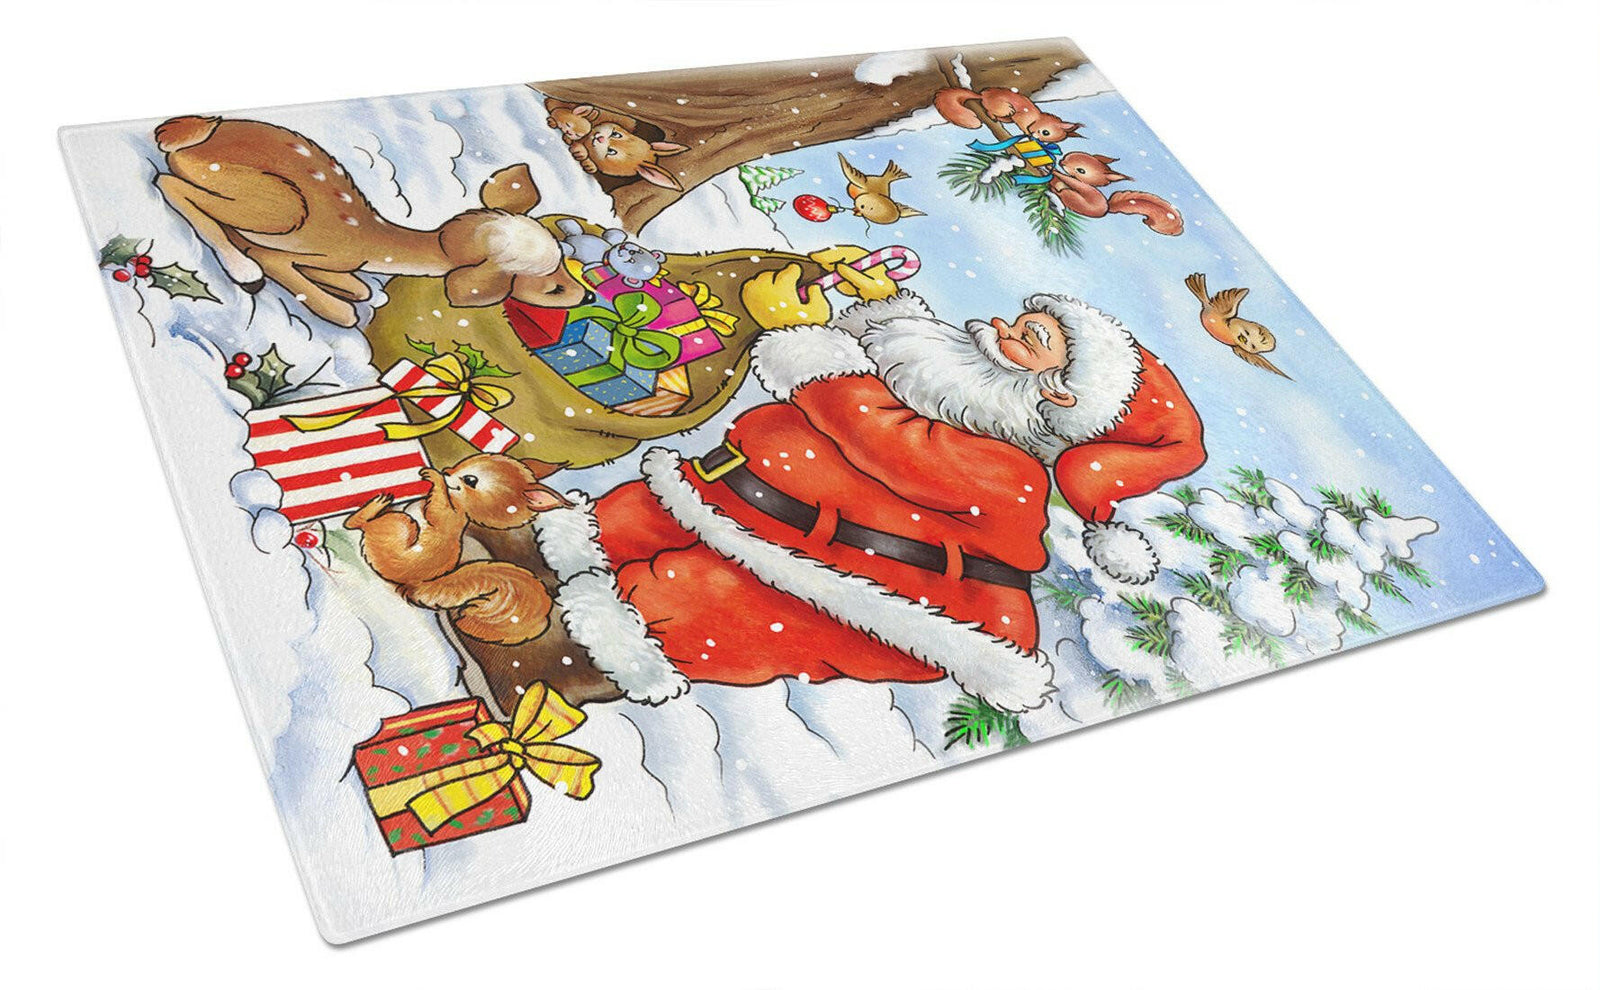 Christmas Santa Claus handing out presents Glass Cutting Board Large APH5444LCB by Caroline's Treasures